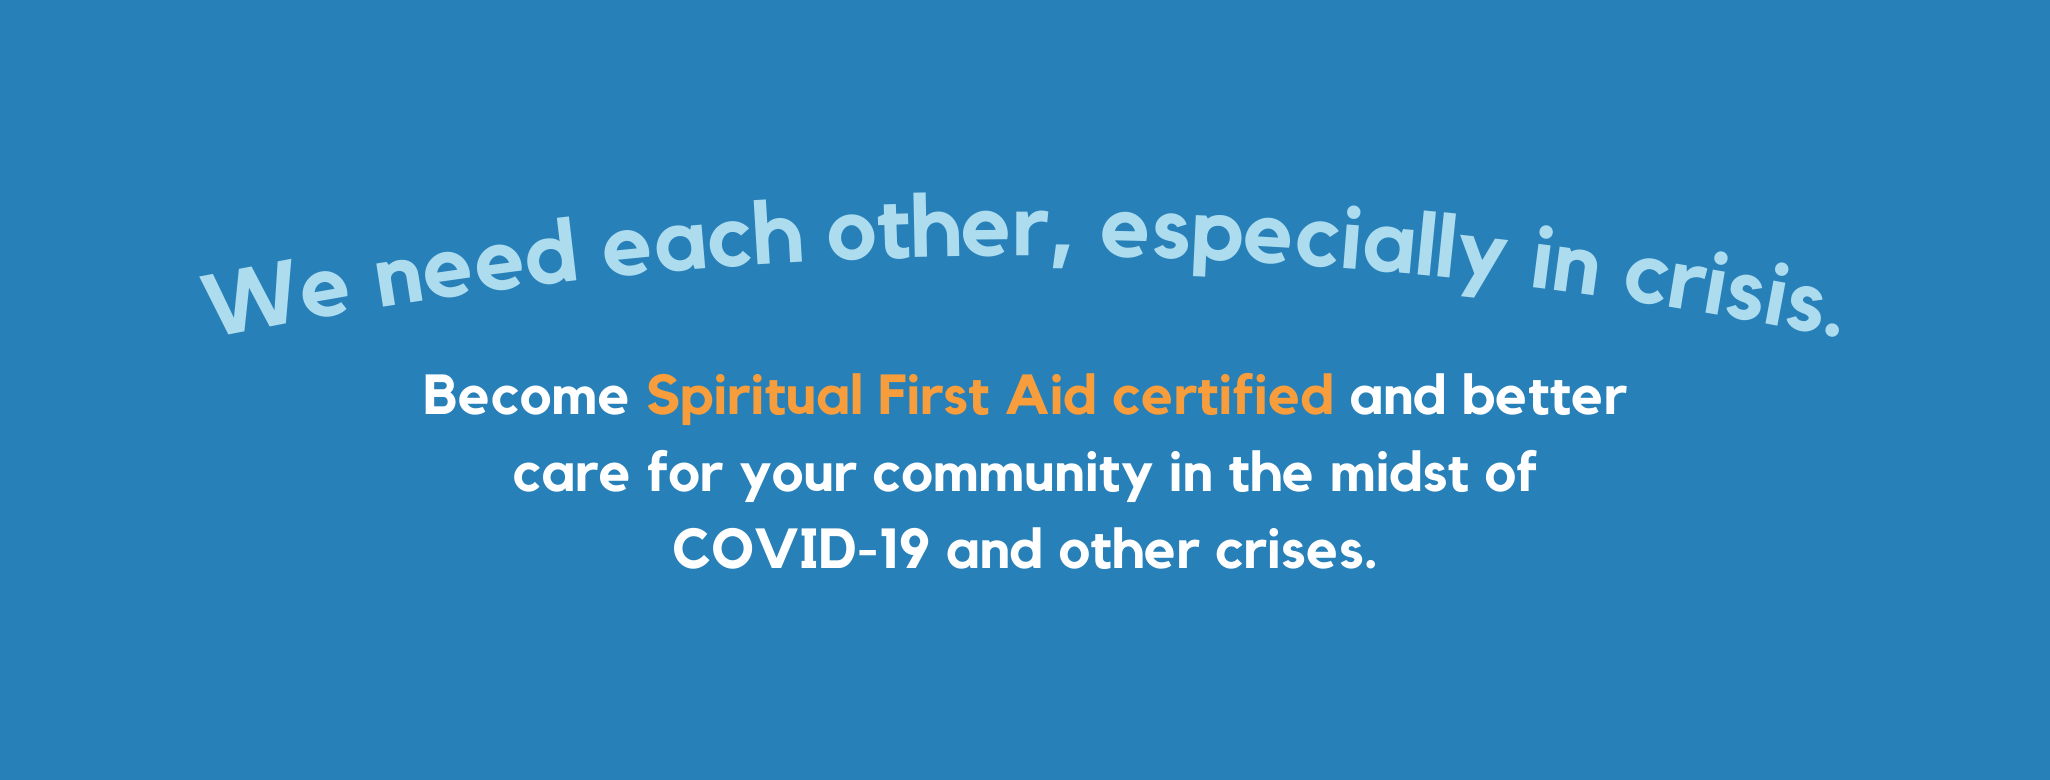 The official online certificate course for Spiritual First Aid. Spiritual First Aid provides a step-by-step approach to emotional and spiritual care during COVID-19, disasters, and other challenging times. Developed through 15 years of research, Spiritual First Aid will equip you to humbly provide peer-to-peer support to those who are struggling.